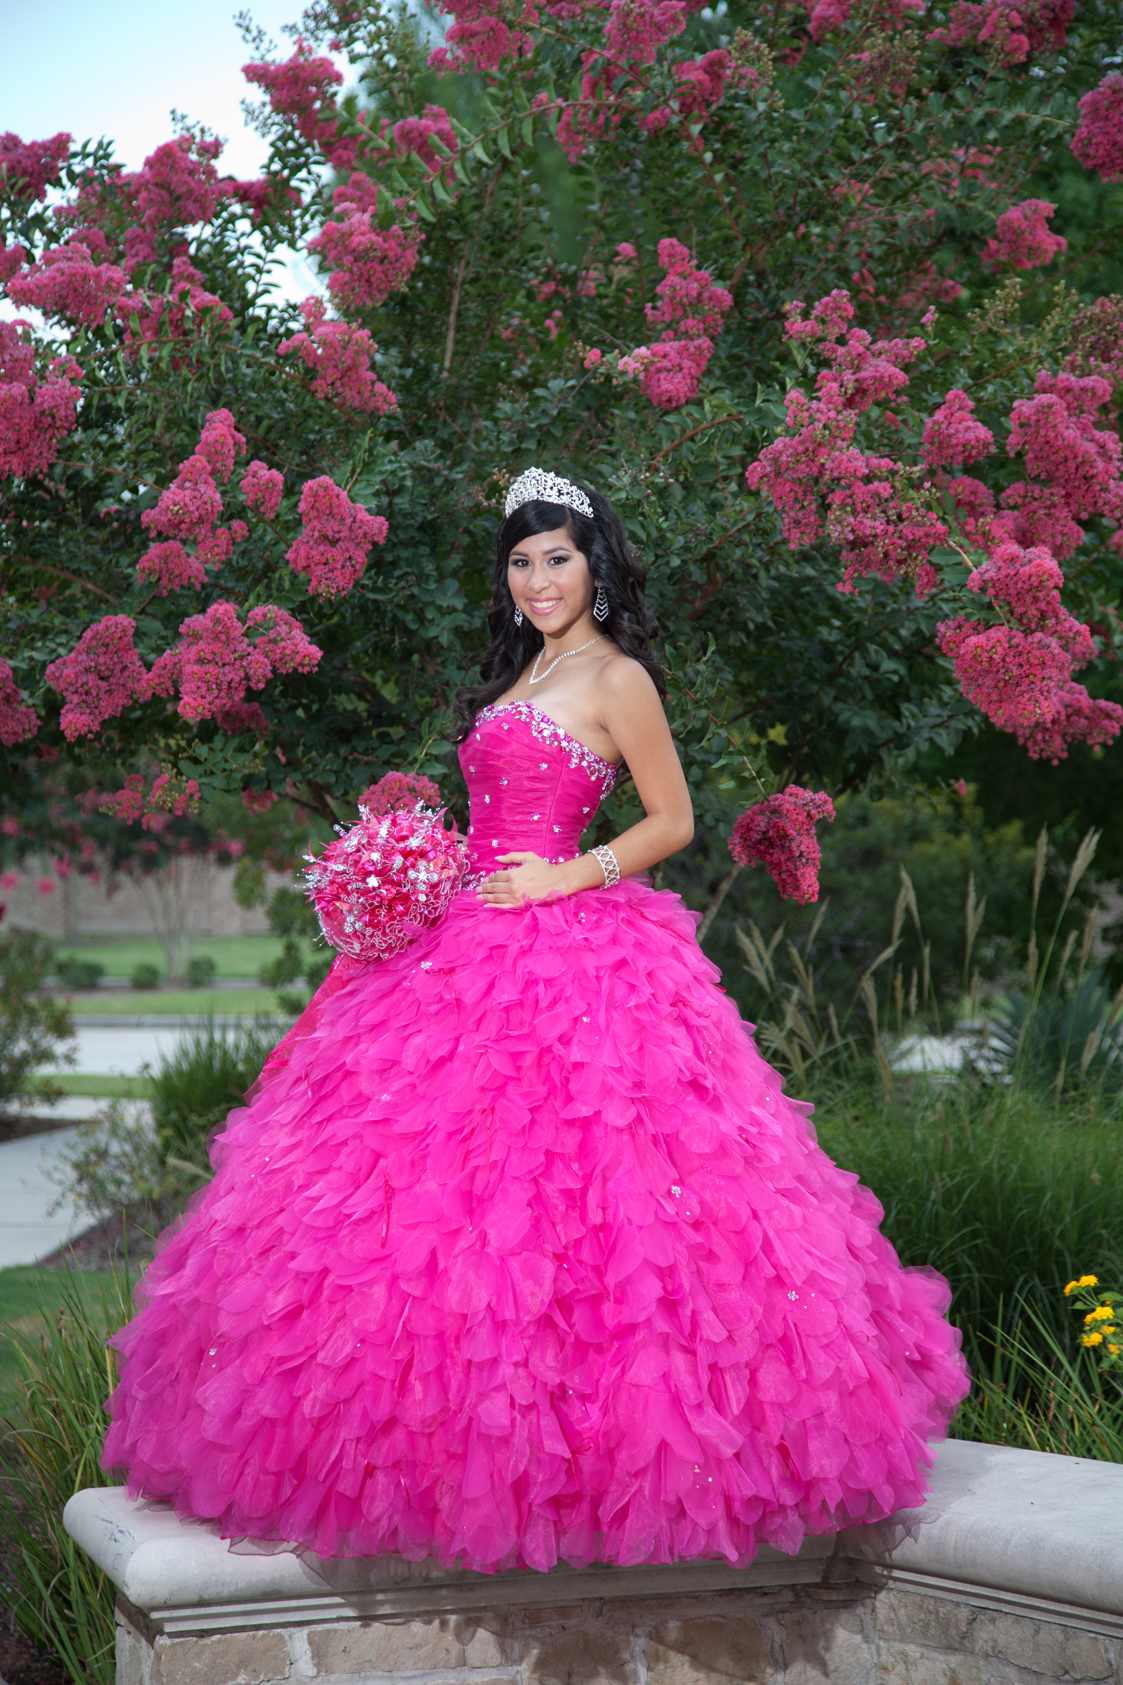 How Much Should I Charge To Photograph A Quinceanera